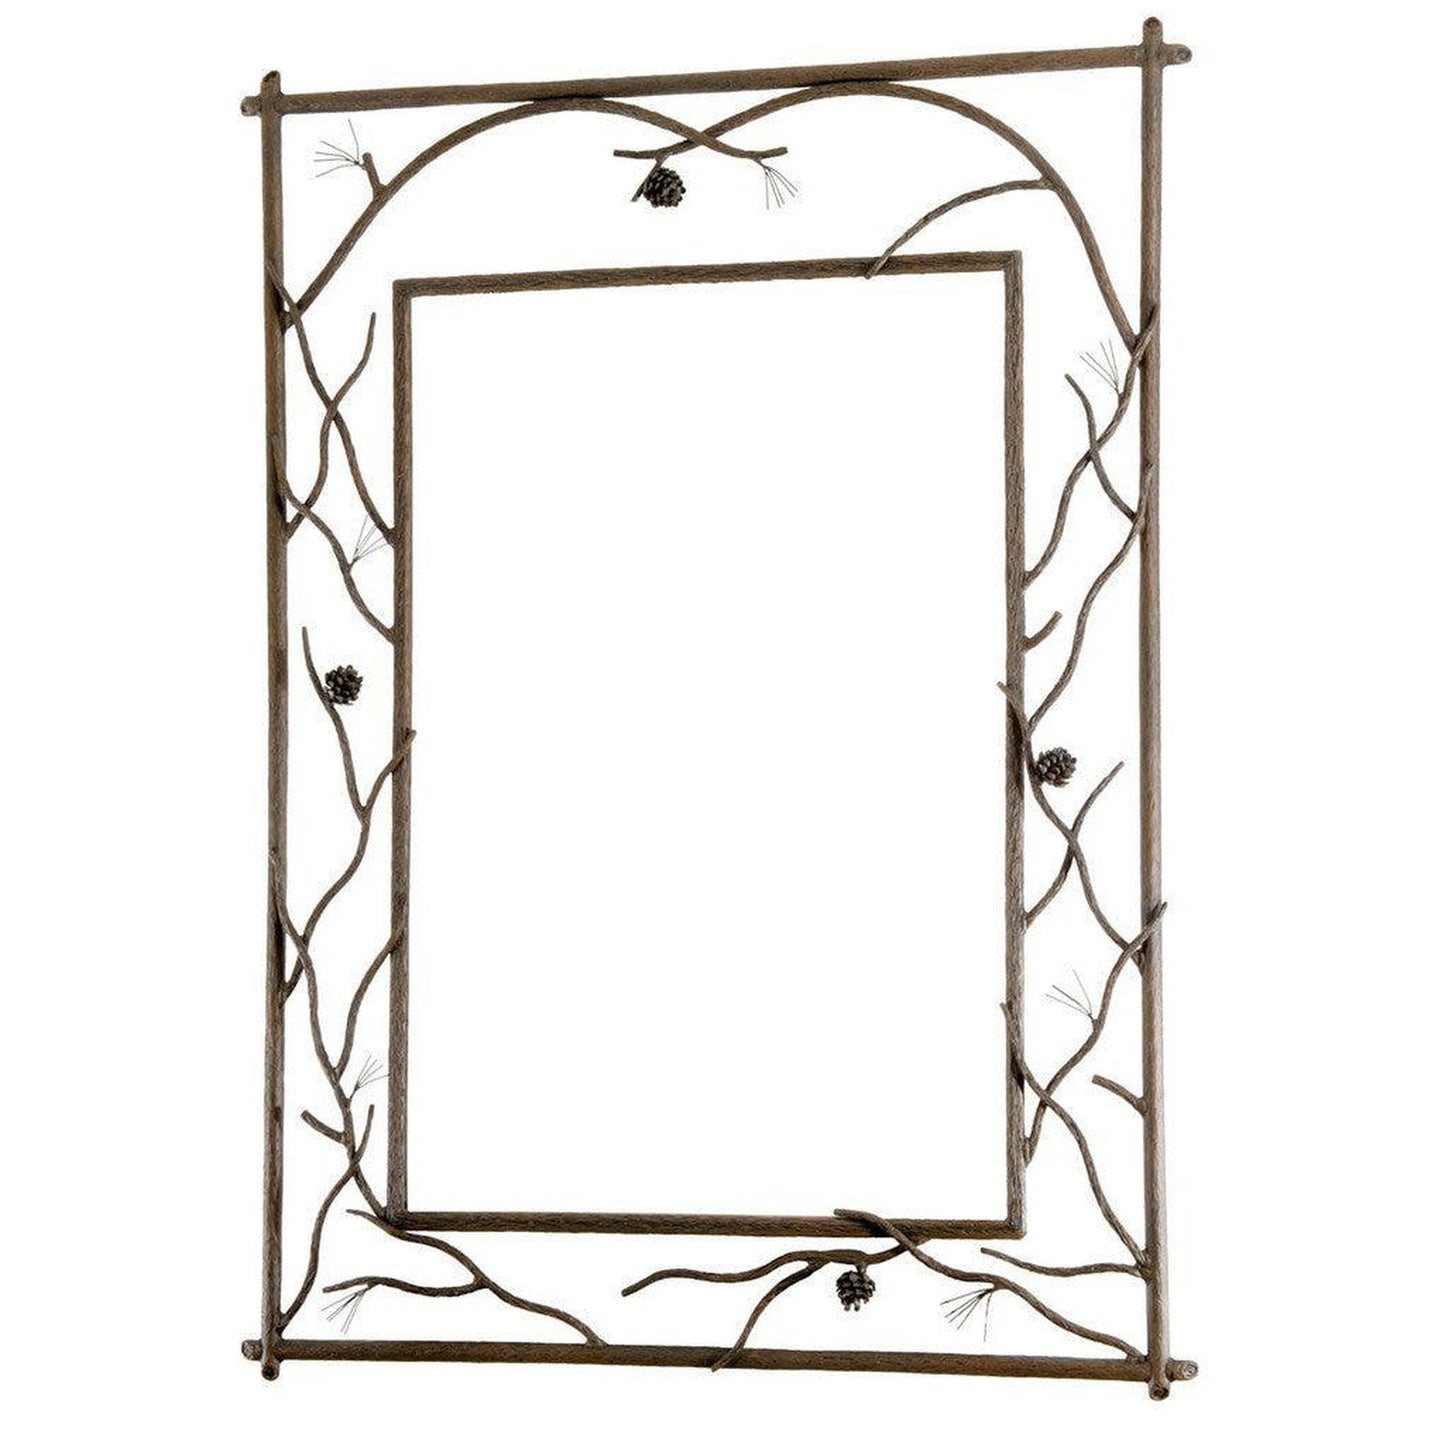 Stone County Ironworks Pine 29" x 35" Small Woodland Brown Branched Iron Wall Mirror With Copper Iron Accent